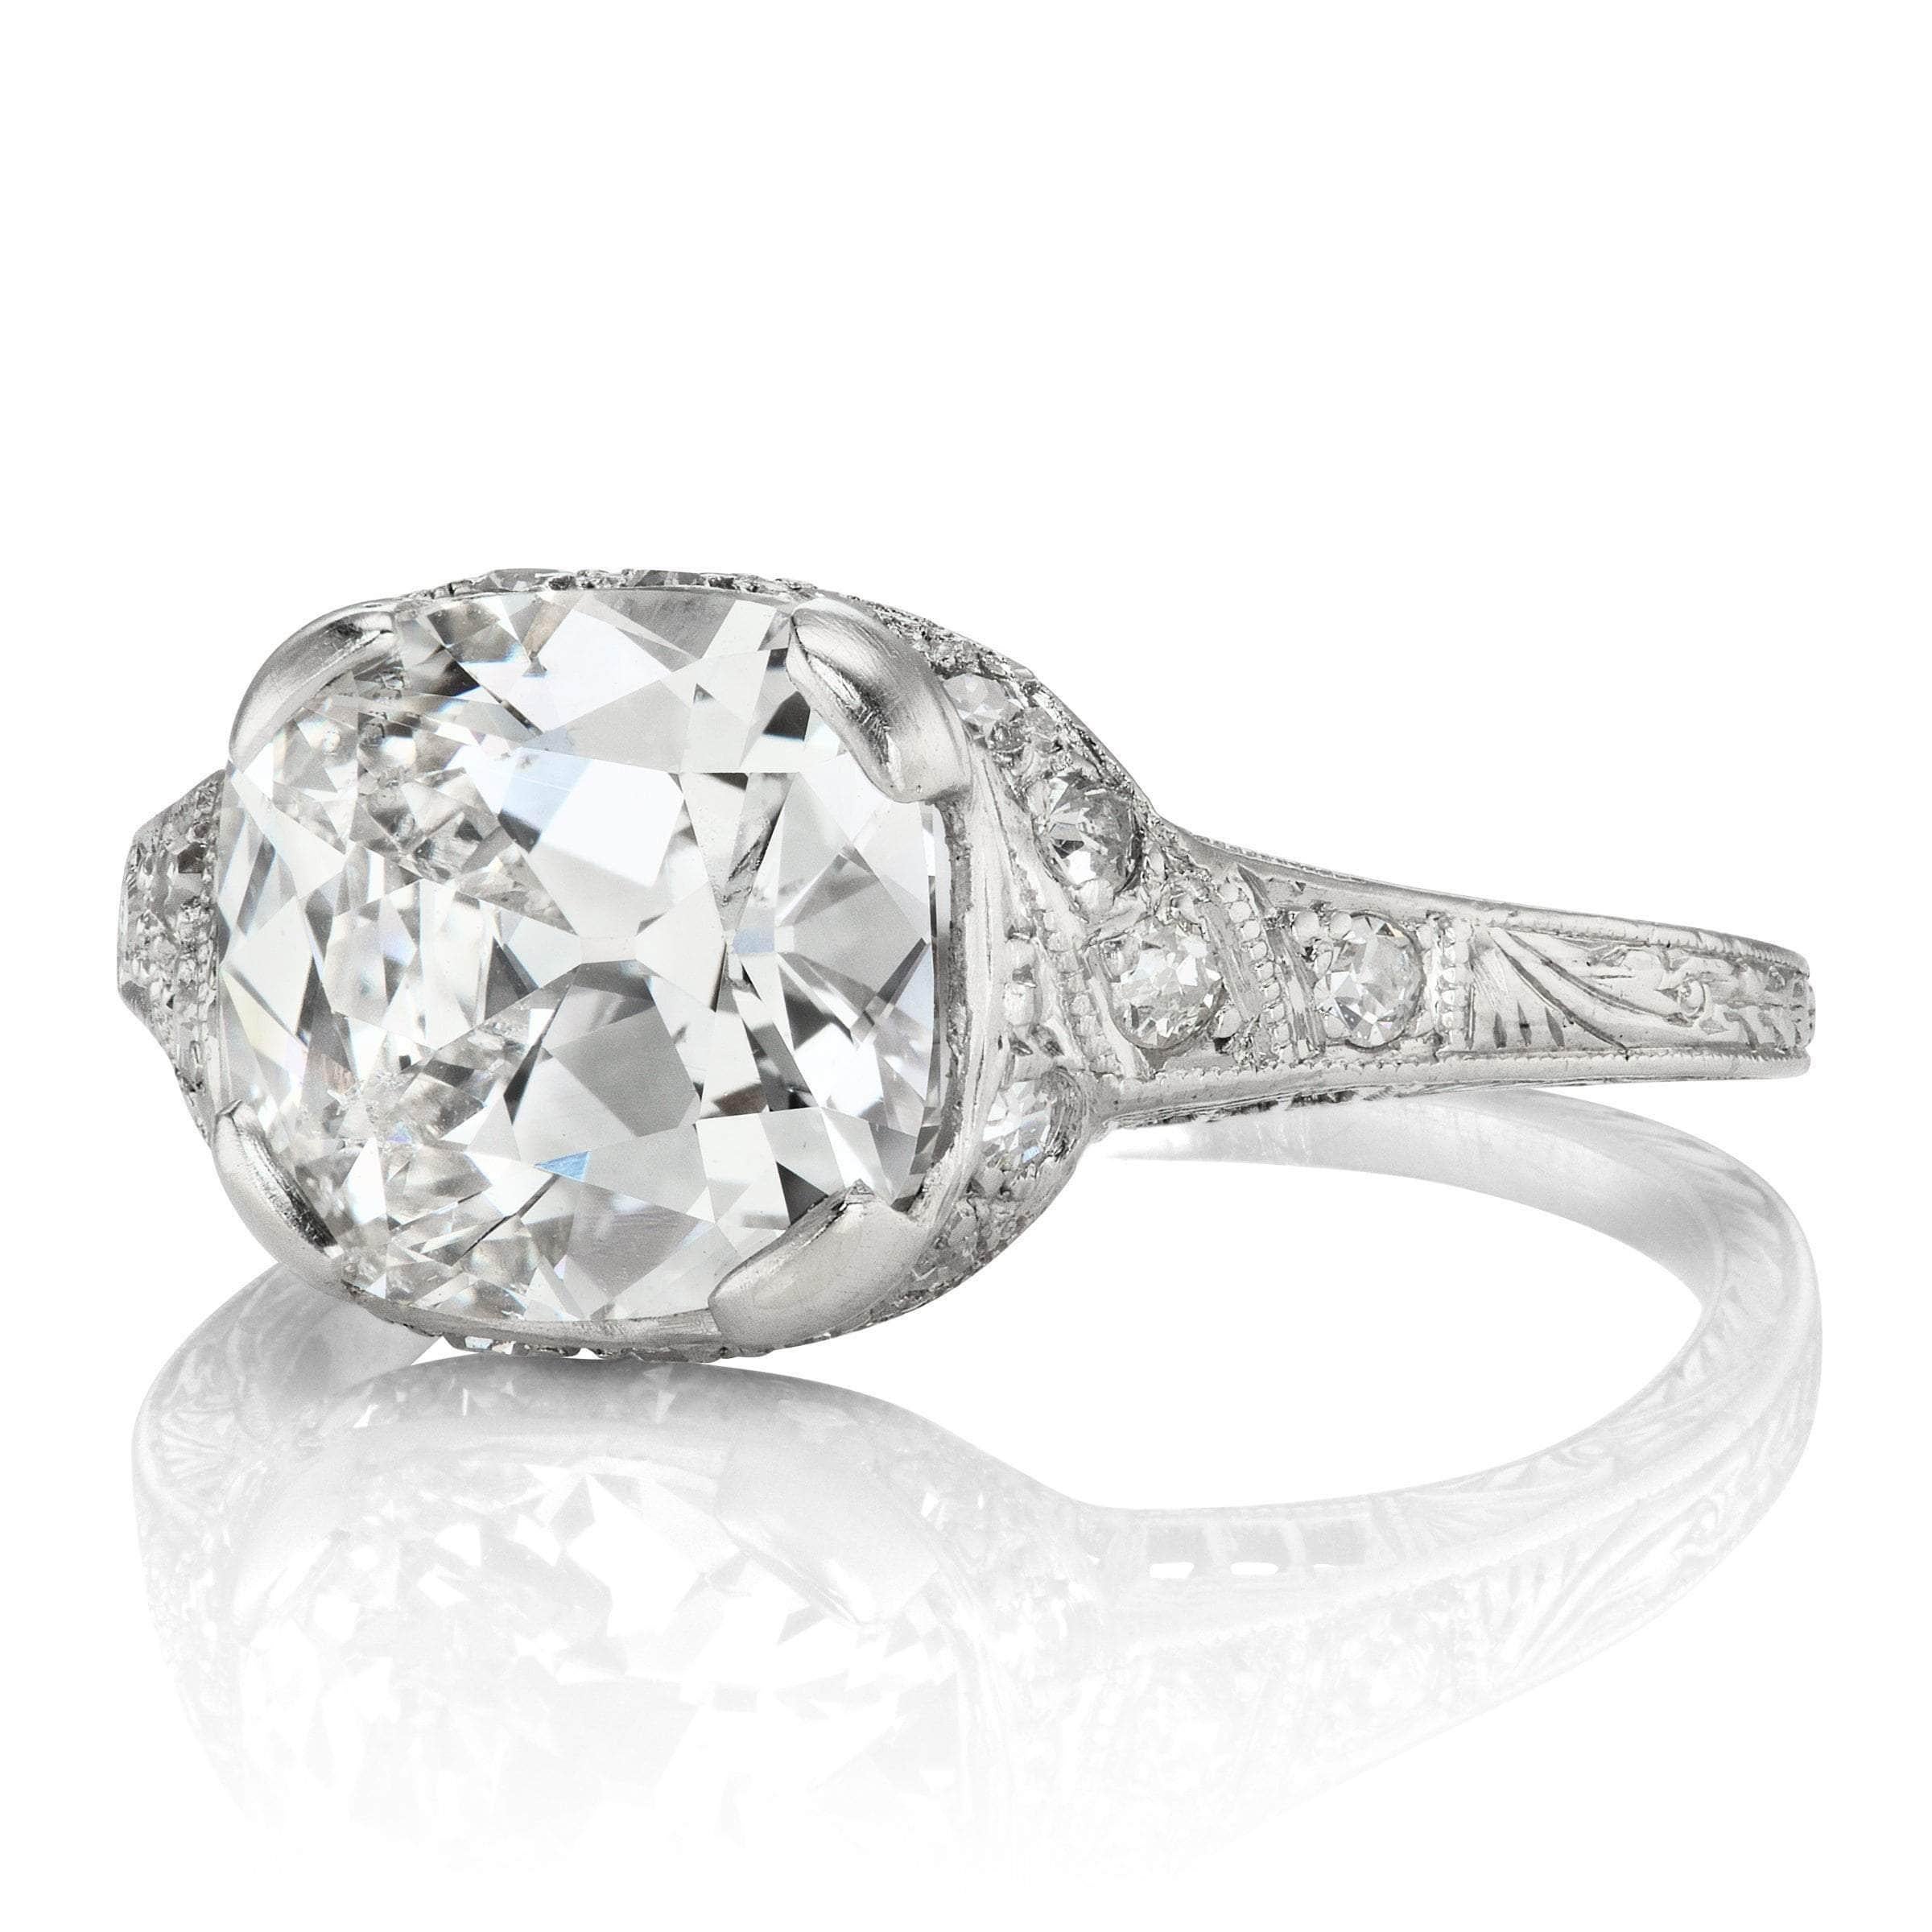 This ring is an authentic Art Deco engagement ring circa 1925! This 